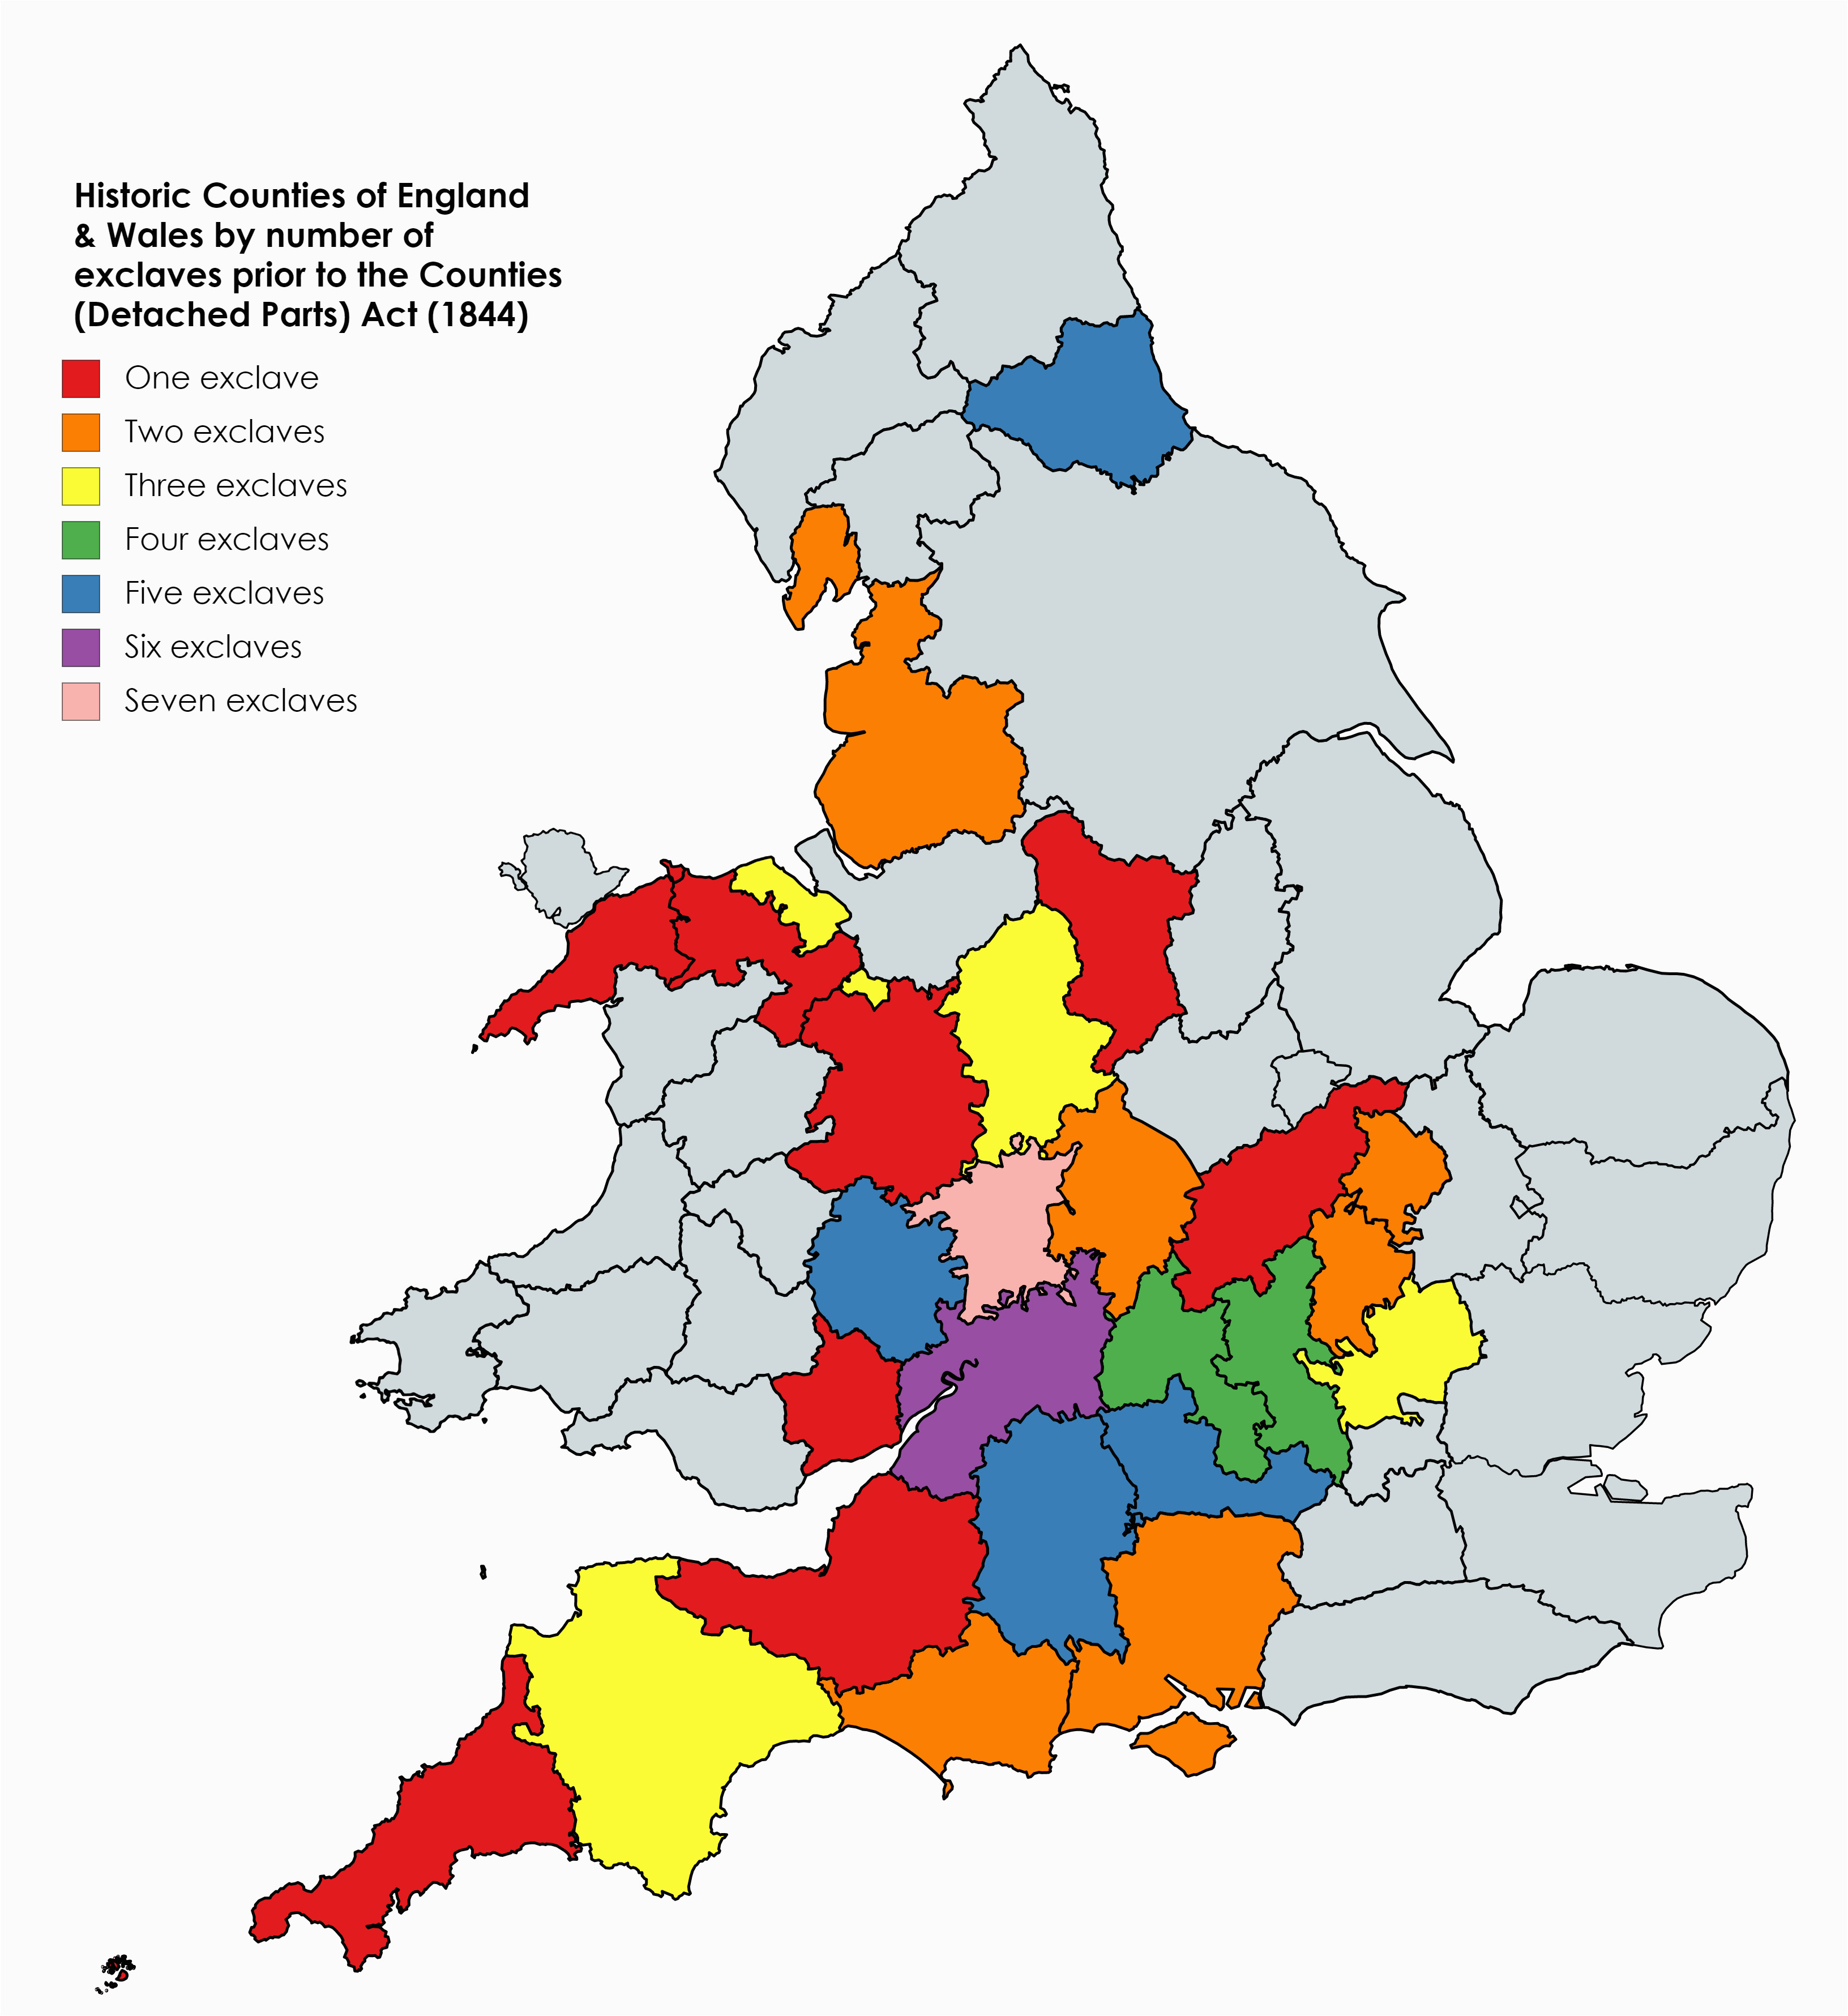 Map Of the England Counties Historic Counties Of England Wales by Number Of Exclaves Prior to